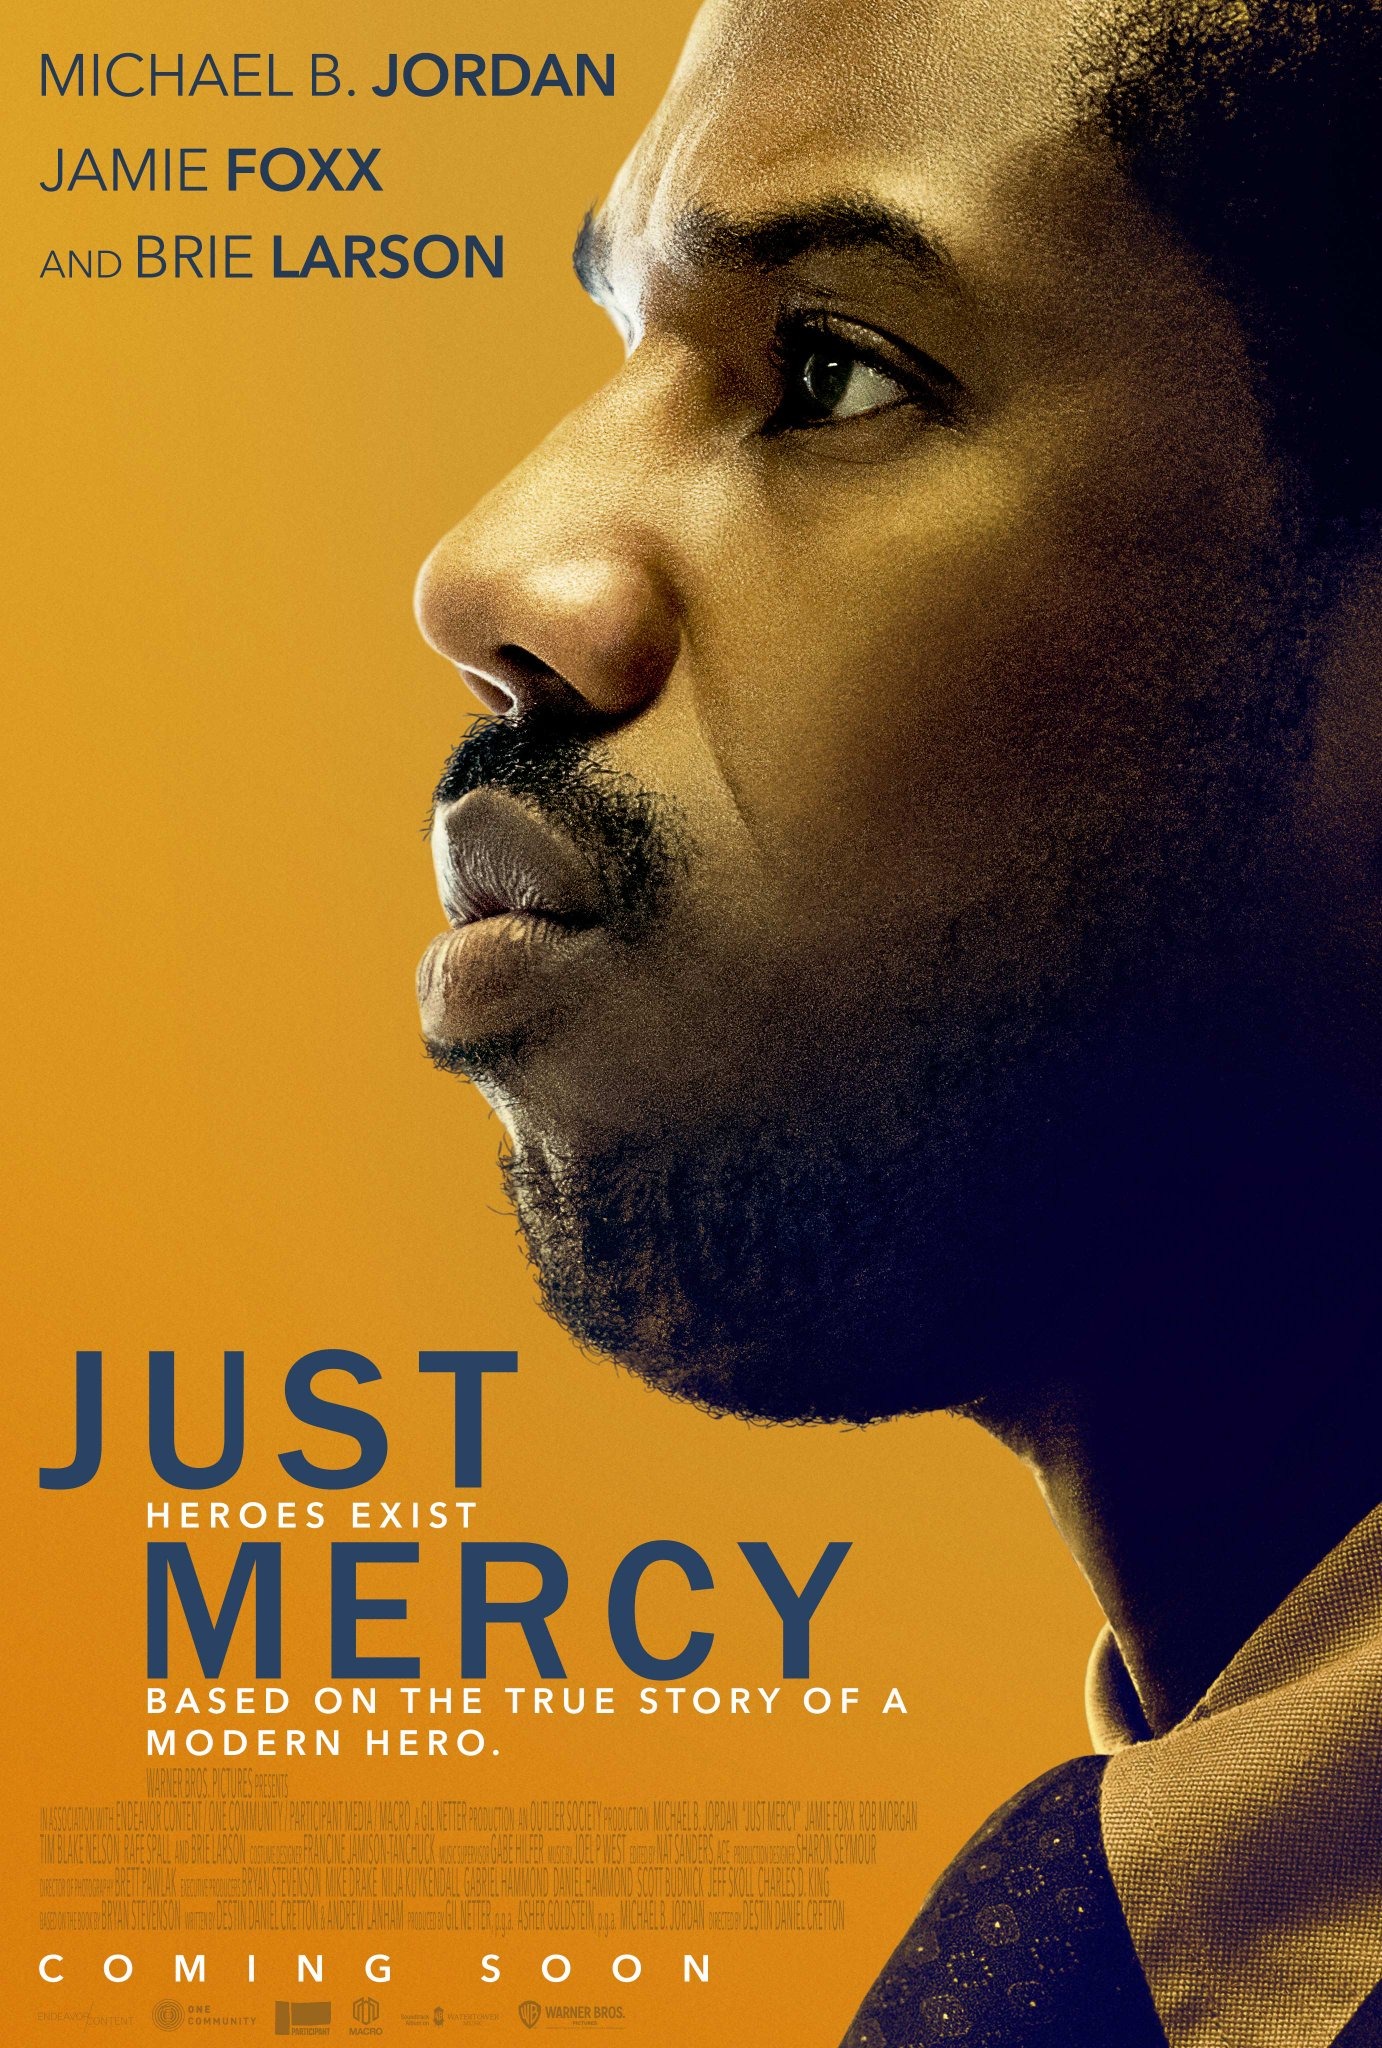 Mega Sized Movie Poster Image for Just Mercy (#3 of 4)